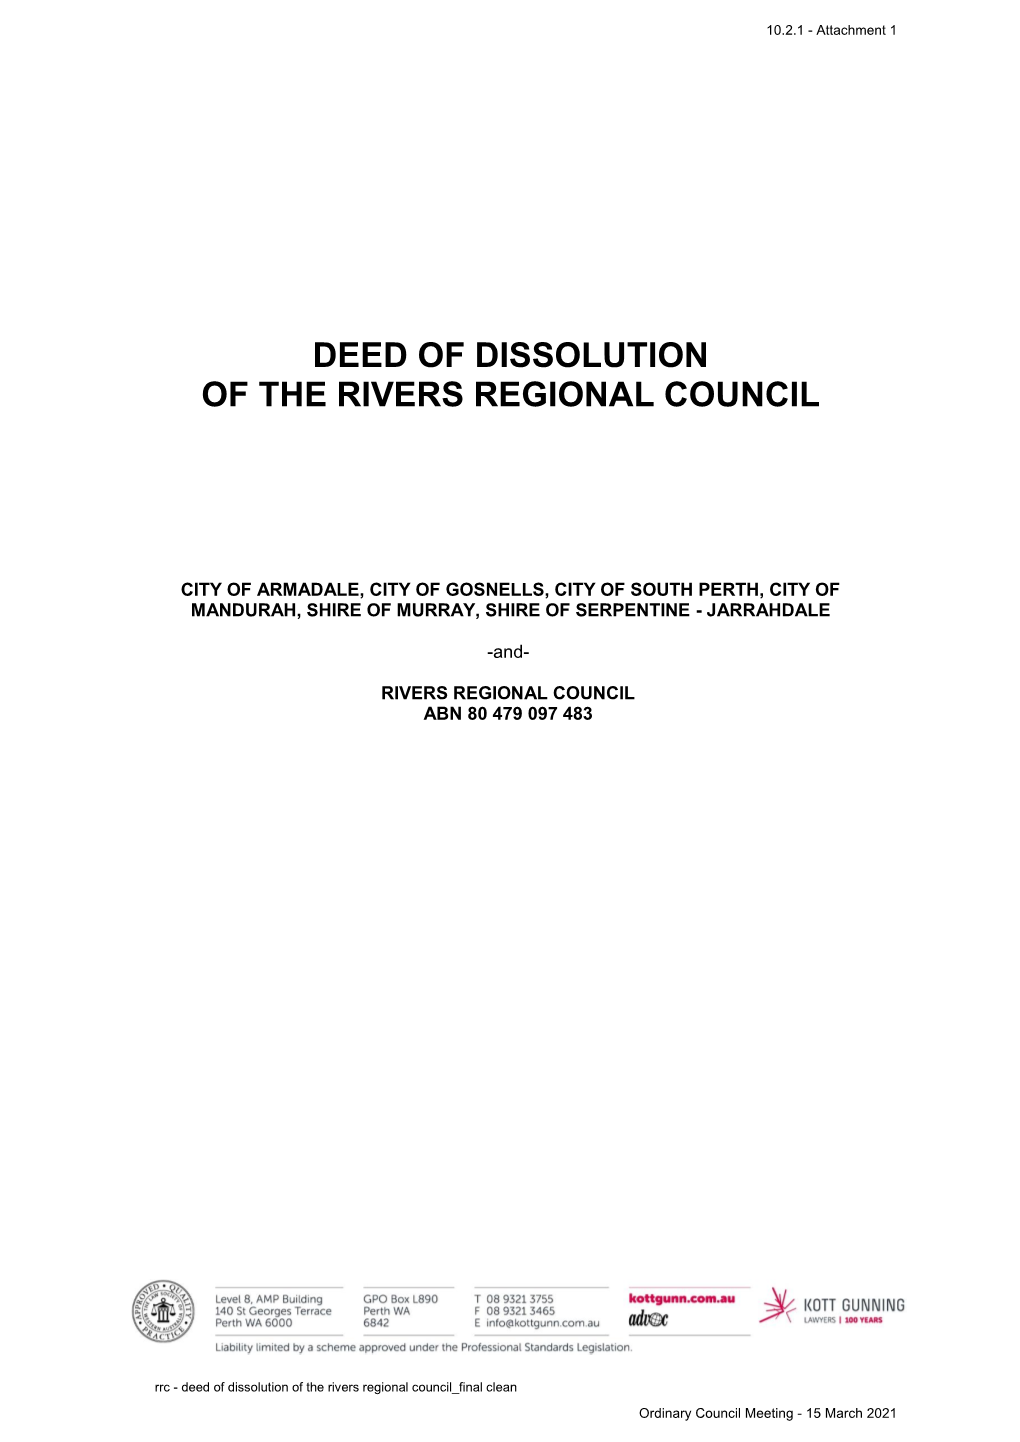 Deed of Dissolution of the Rivers Regional Council